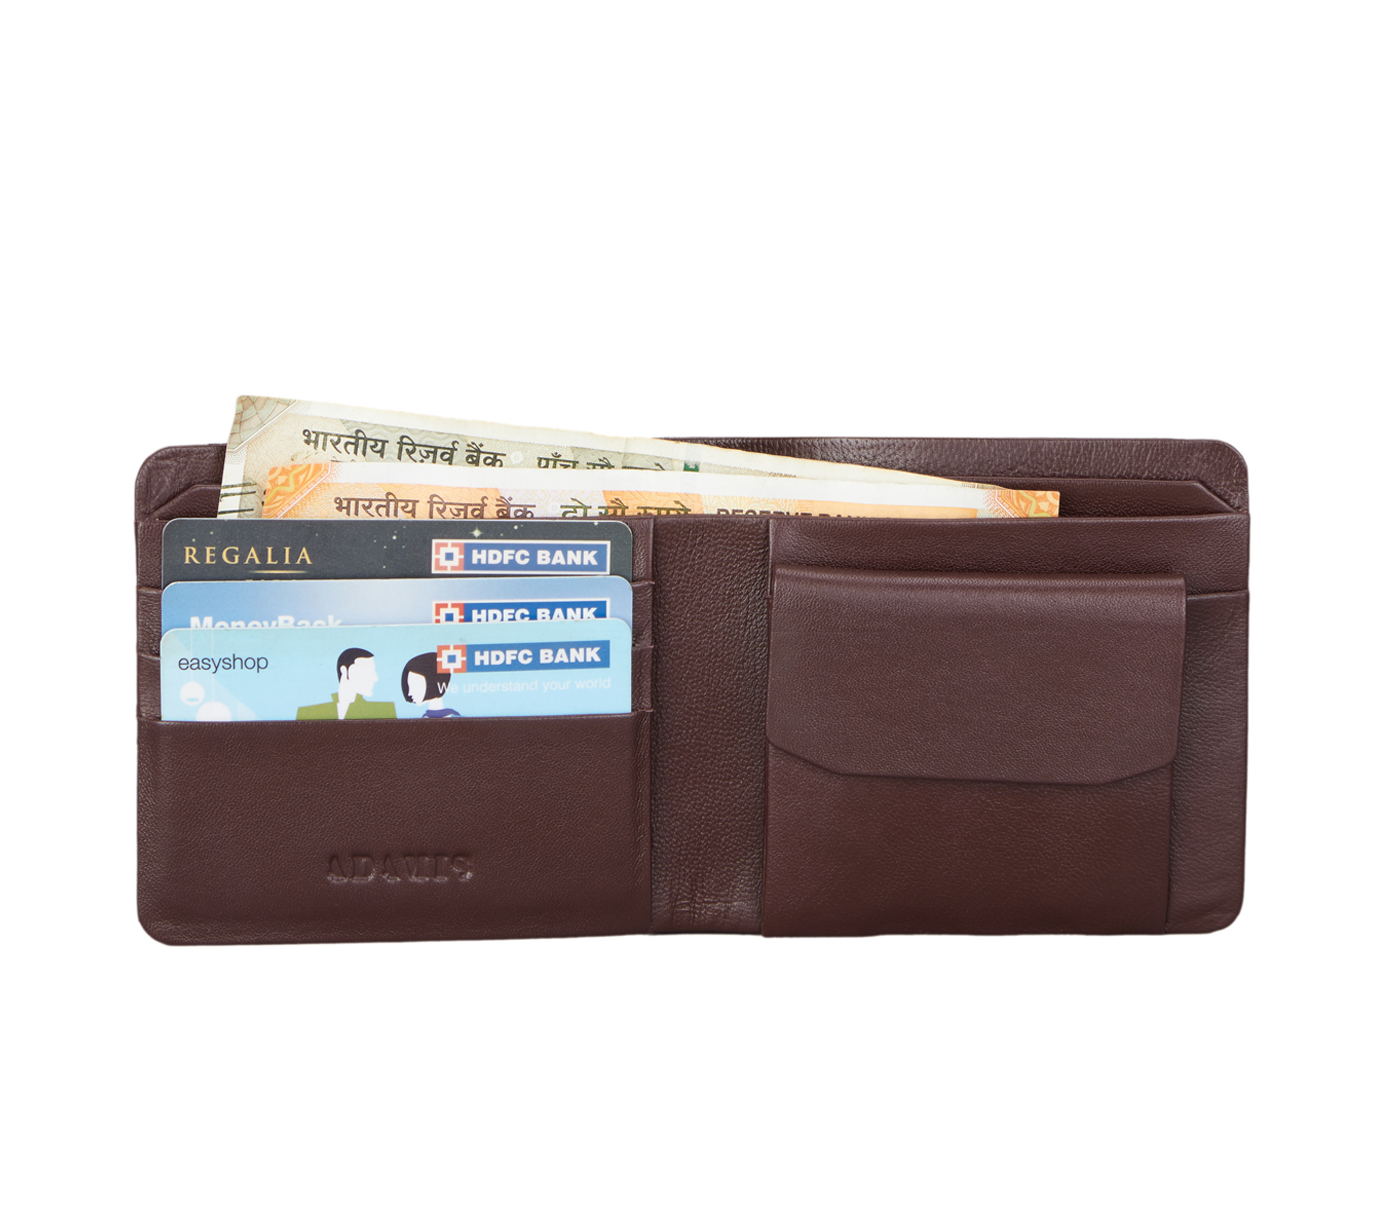 VW1-Ashton-Men's bifold wallet with coin pocket in Genuine Leather - Wine